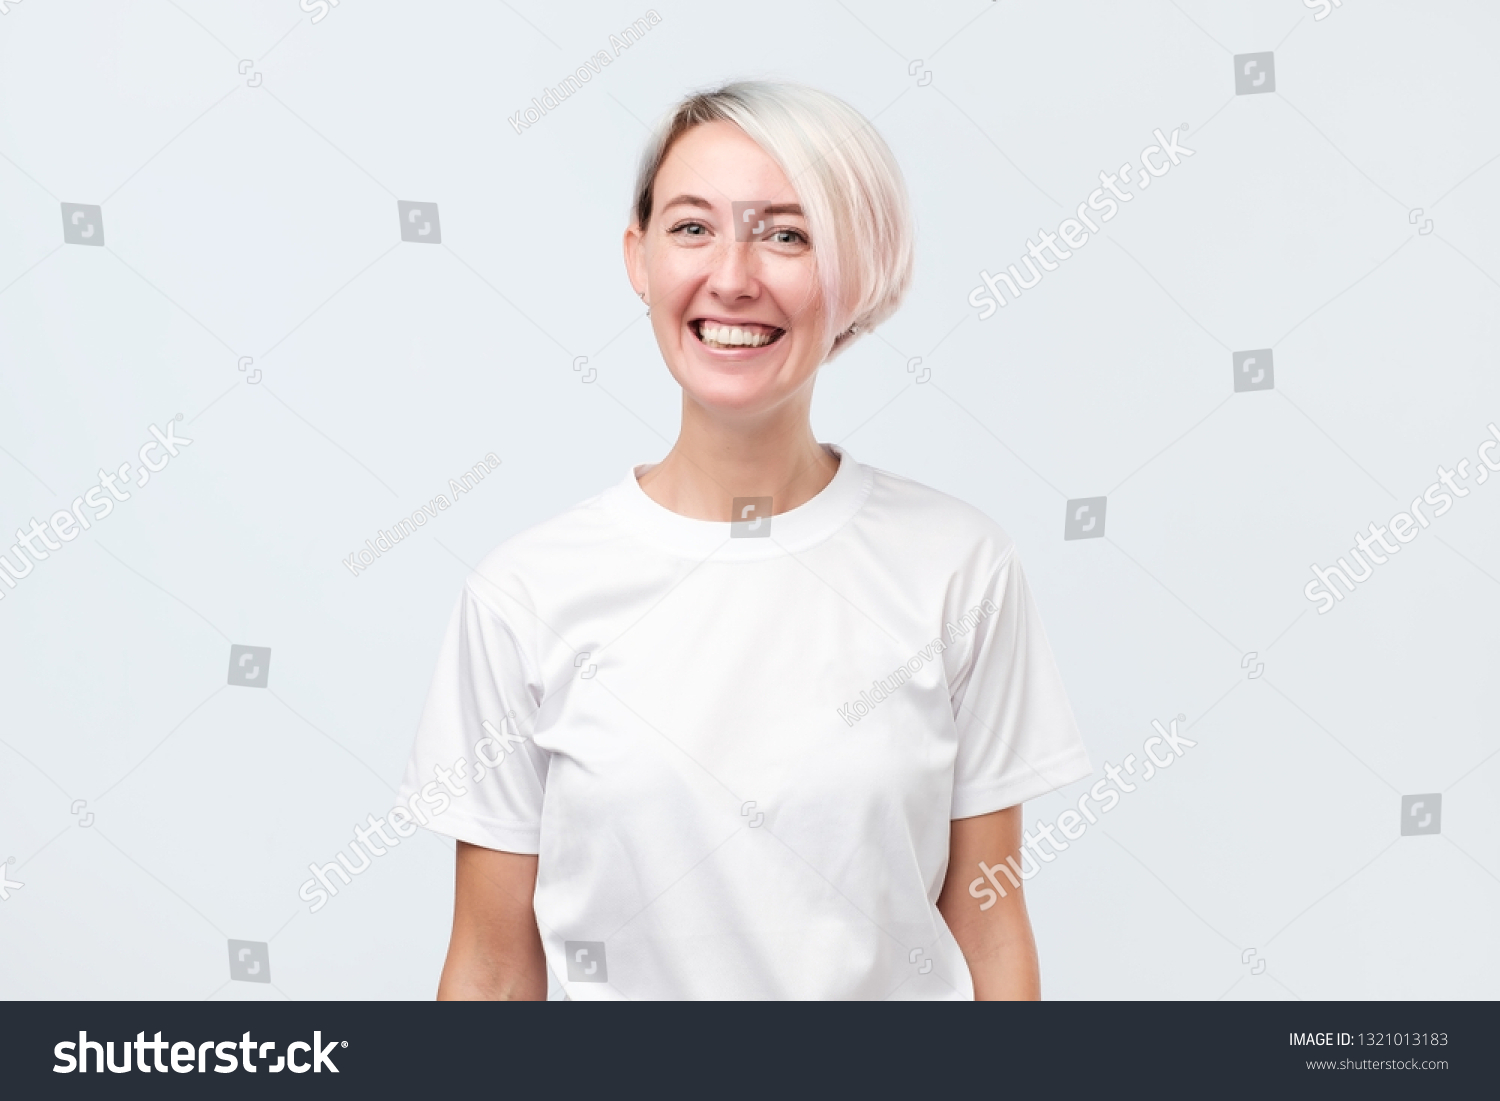 Attractive woman in white t-shirt with short dyed hair being very glad smiling with broad smile showing her perfect teeth having fun indoors. #1321013183